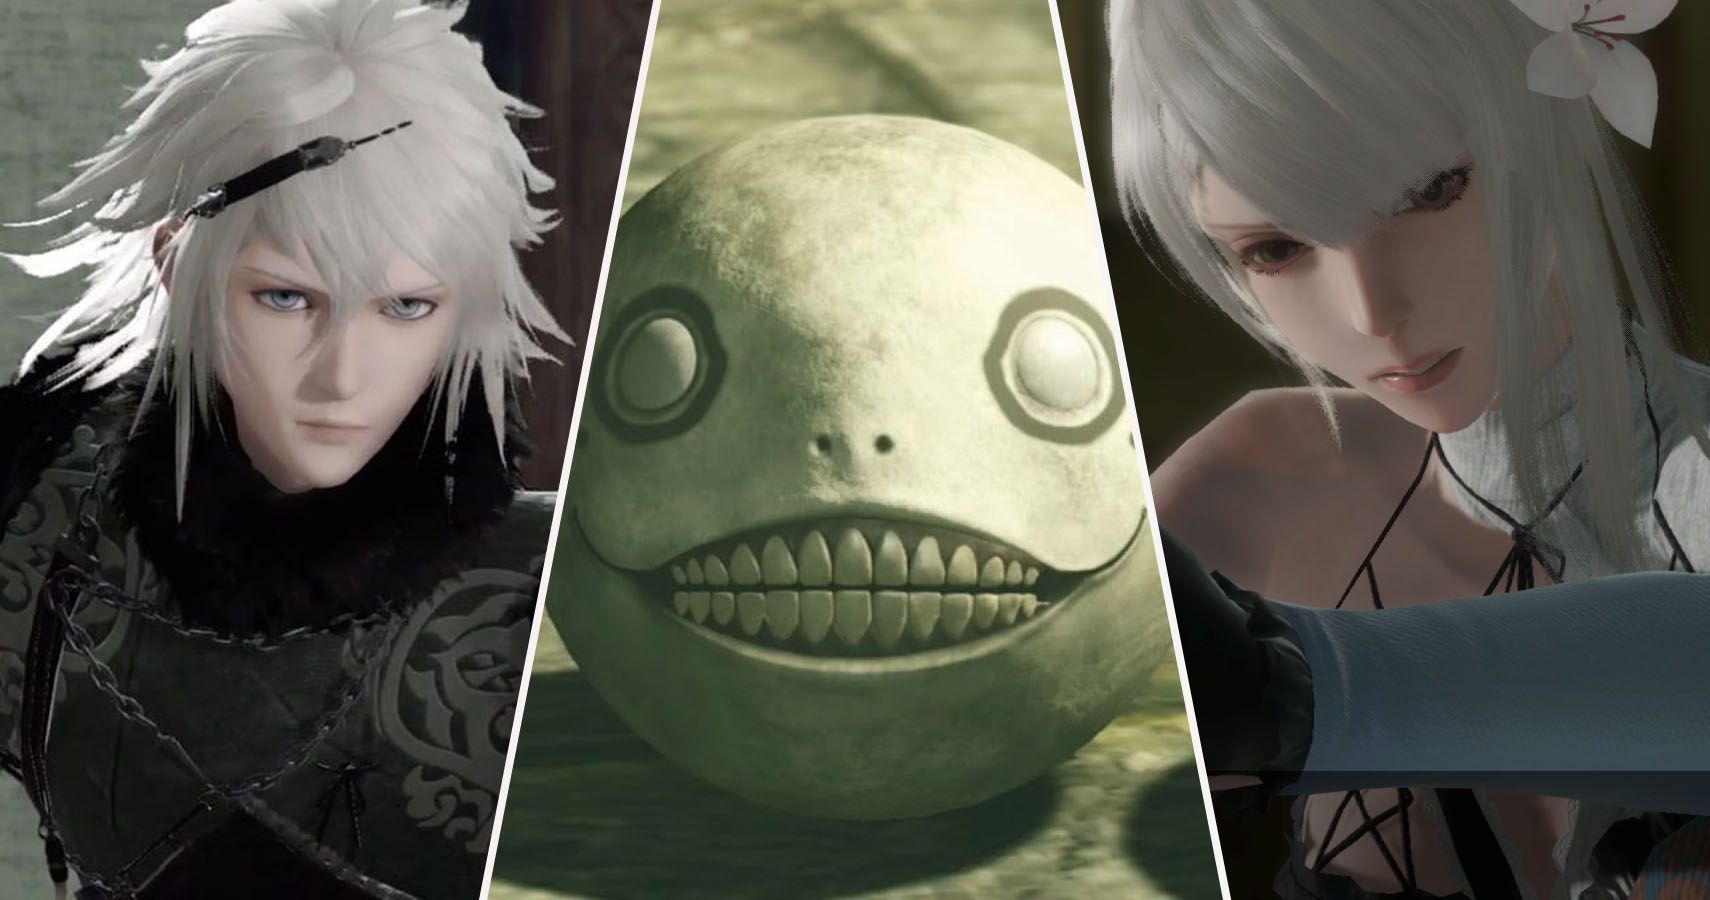 10 things I wish I knew before playing Nier Replicant